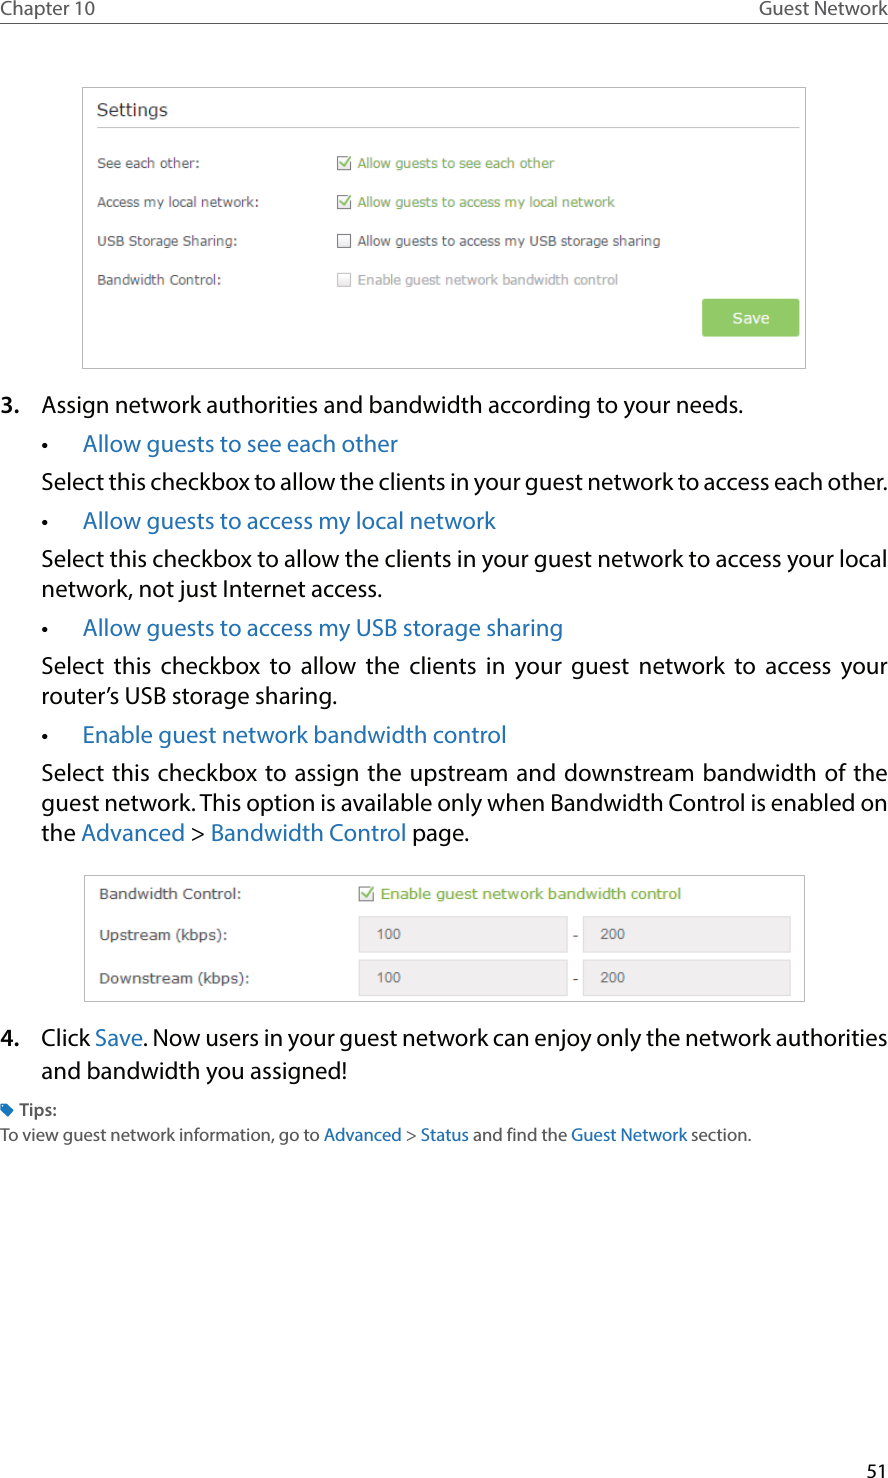 51Chapter 10 Guest Network3.  Assign network authorities and bandwidth according to your needs.•  Allow guests to see each otherSelect this checkbox to allow the clients in your guest network to access each other. •  Allow guests to access my local network Select this checkbox to allow the clients in your guest network to access your local network, not just Internet access. •  Allow guests to access my USB storage sharing Select this checkbox to allow the clients in your guest network to access your router’s USB storage sharing.•  Enable guest network bandwidth controlSelect this checkbox to assign the upstream and downstream bandwidth of the guest network. This option is available only when Bandwidth Control is enabled on the Advanced &gt; Bandwidth Control page.4.  Click Save. Now users in your guest network can enjoy only the network authorities and bandwidth you assigned!Tips:To view guest network information, go to Advanced &gt; Status and find the Guest Network section.